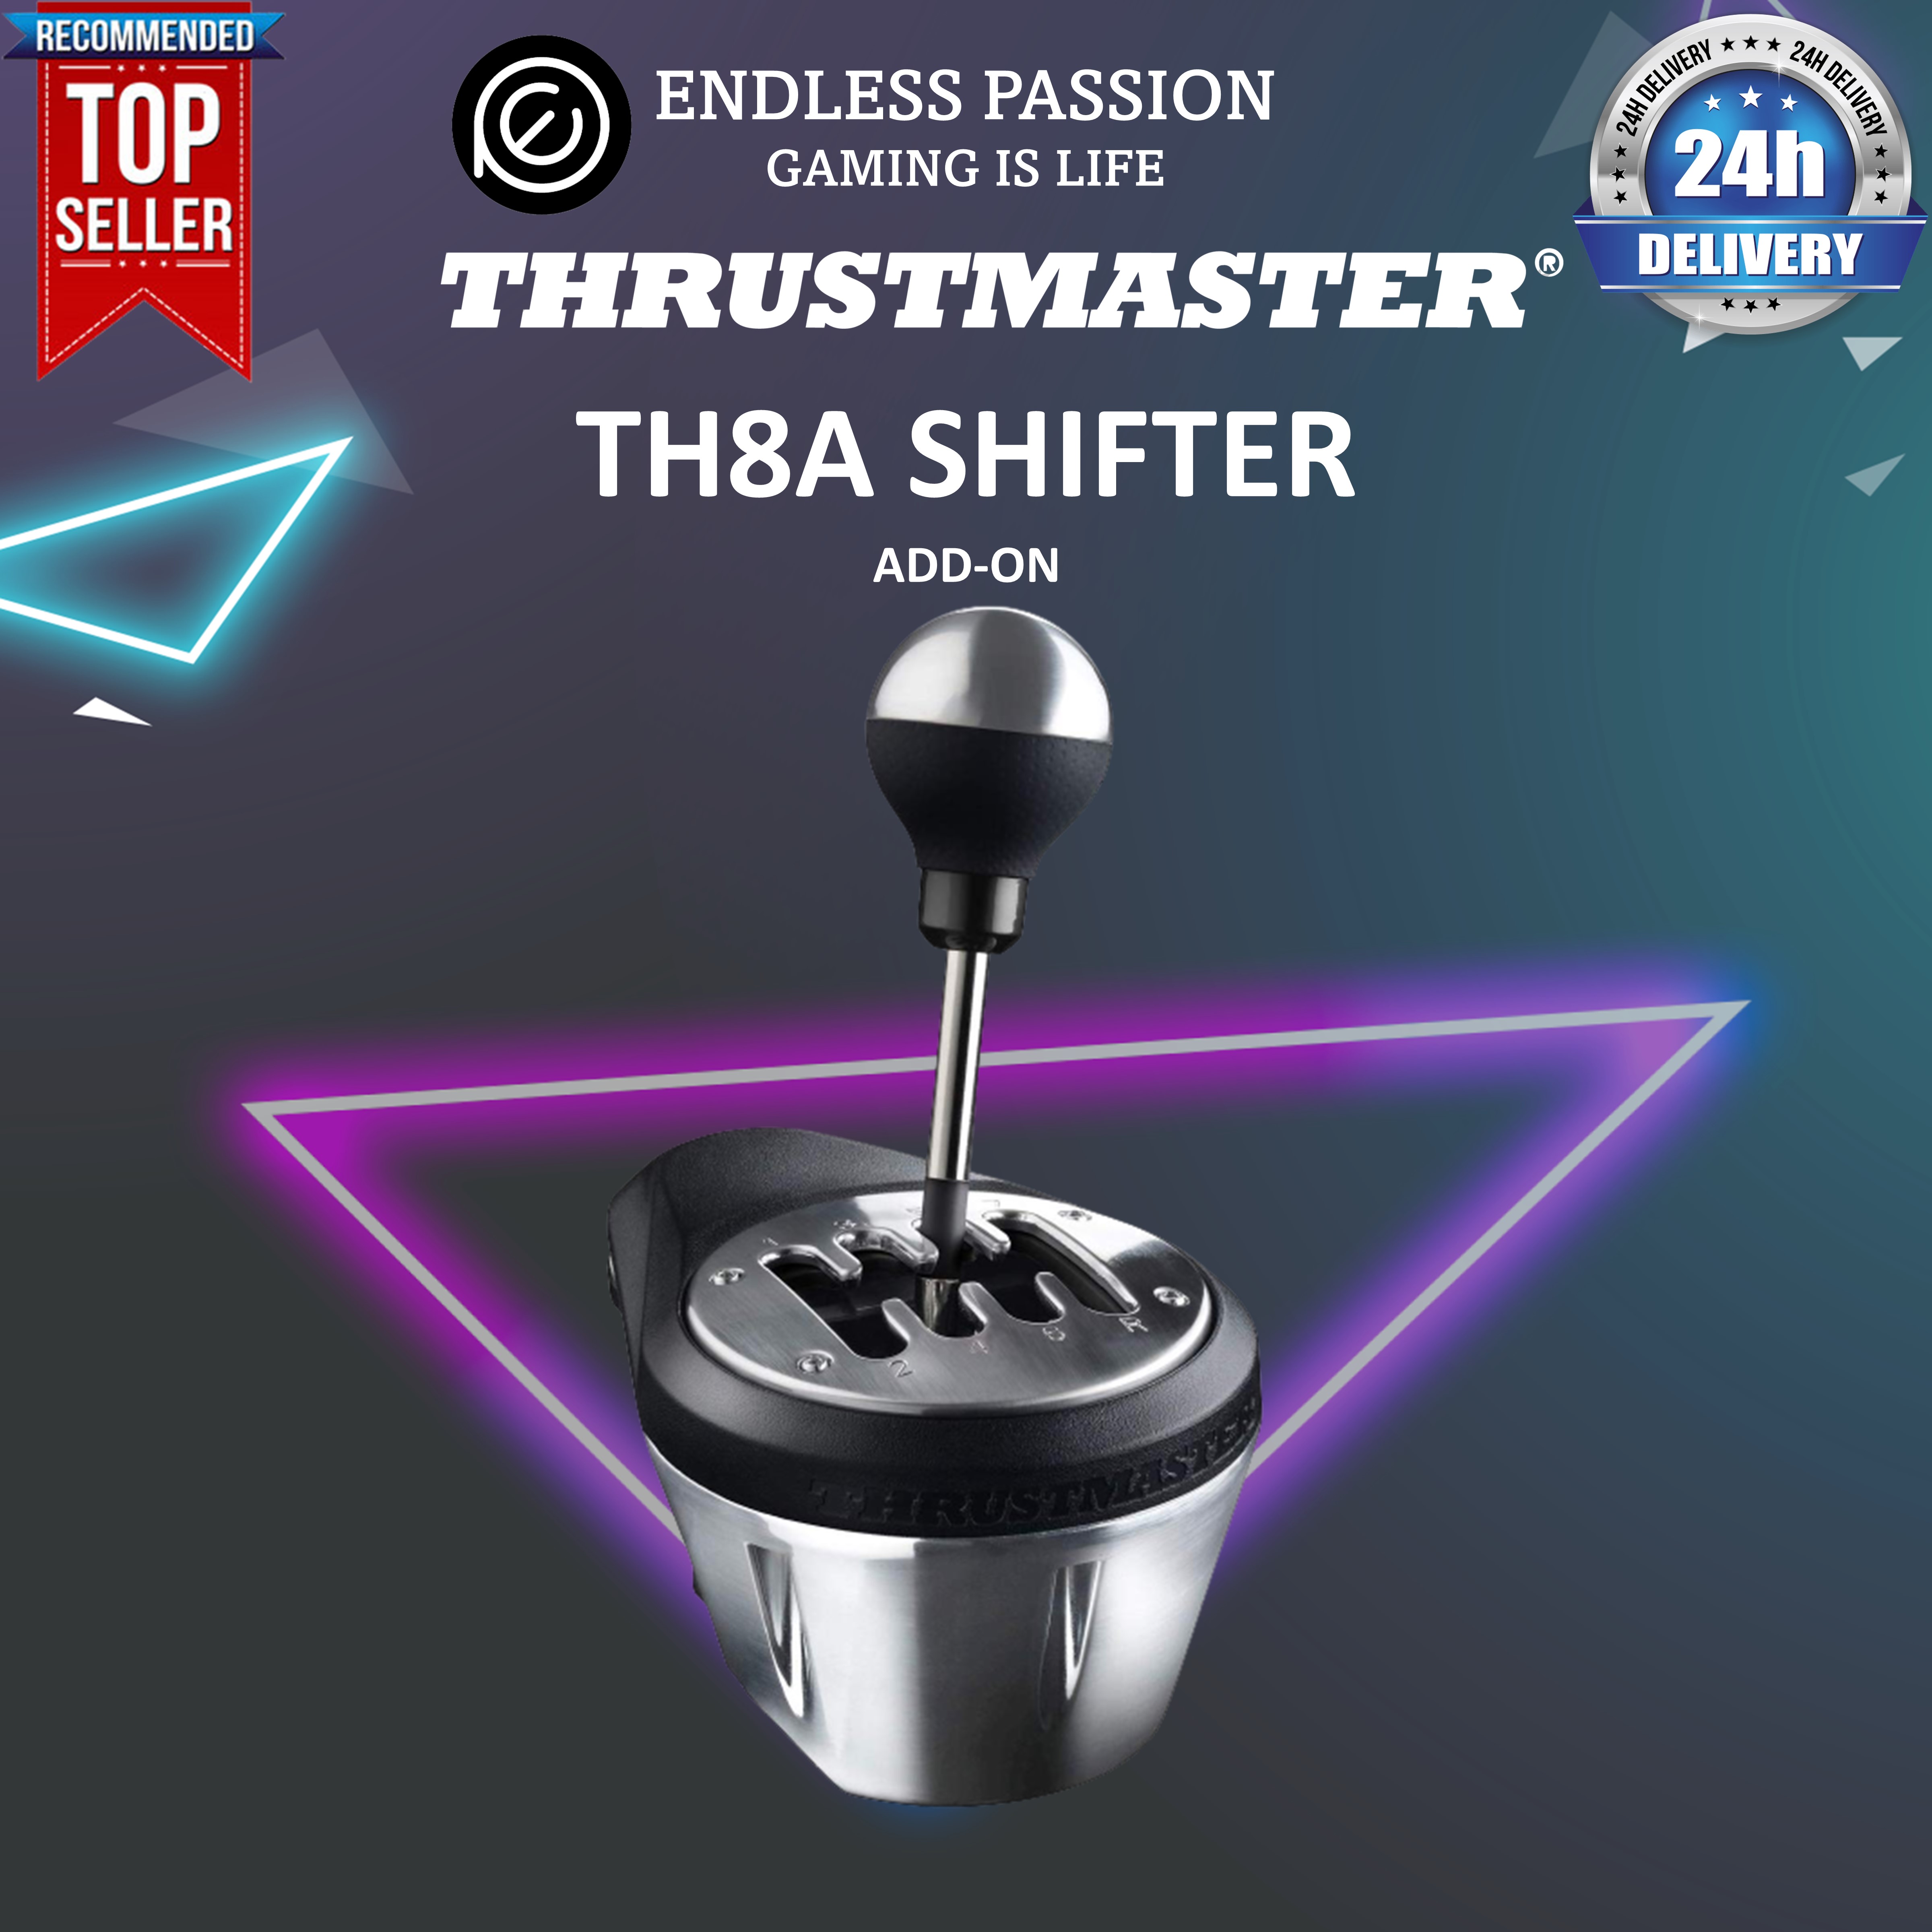 Thrustmaster TH8A Add-on Shifter | Lazada Singapore